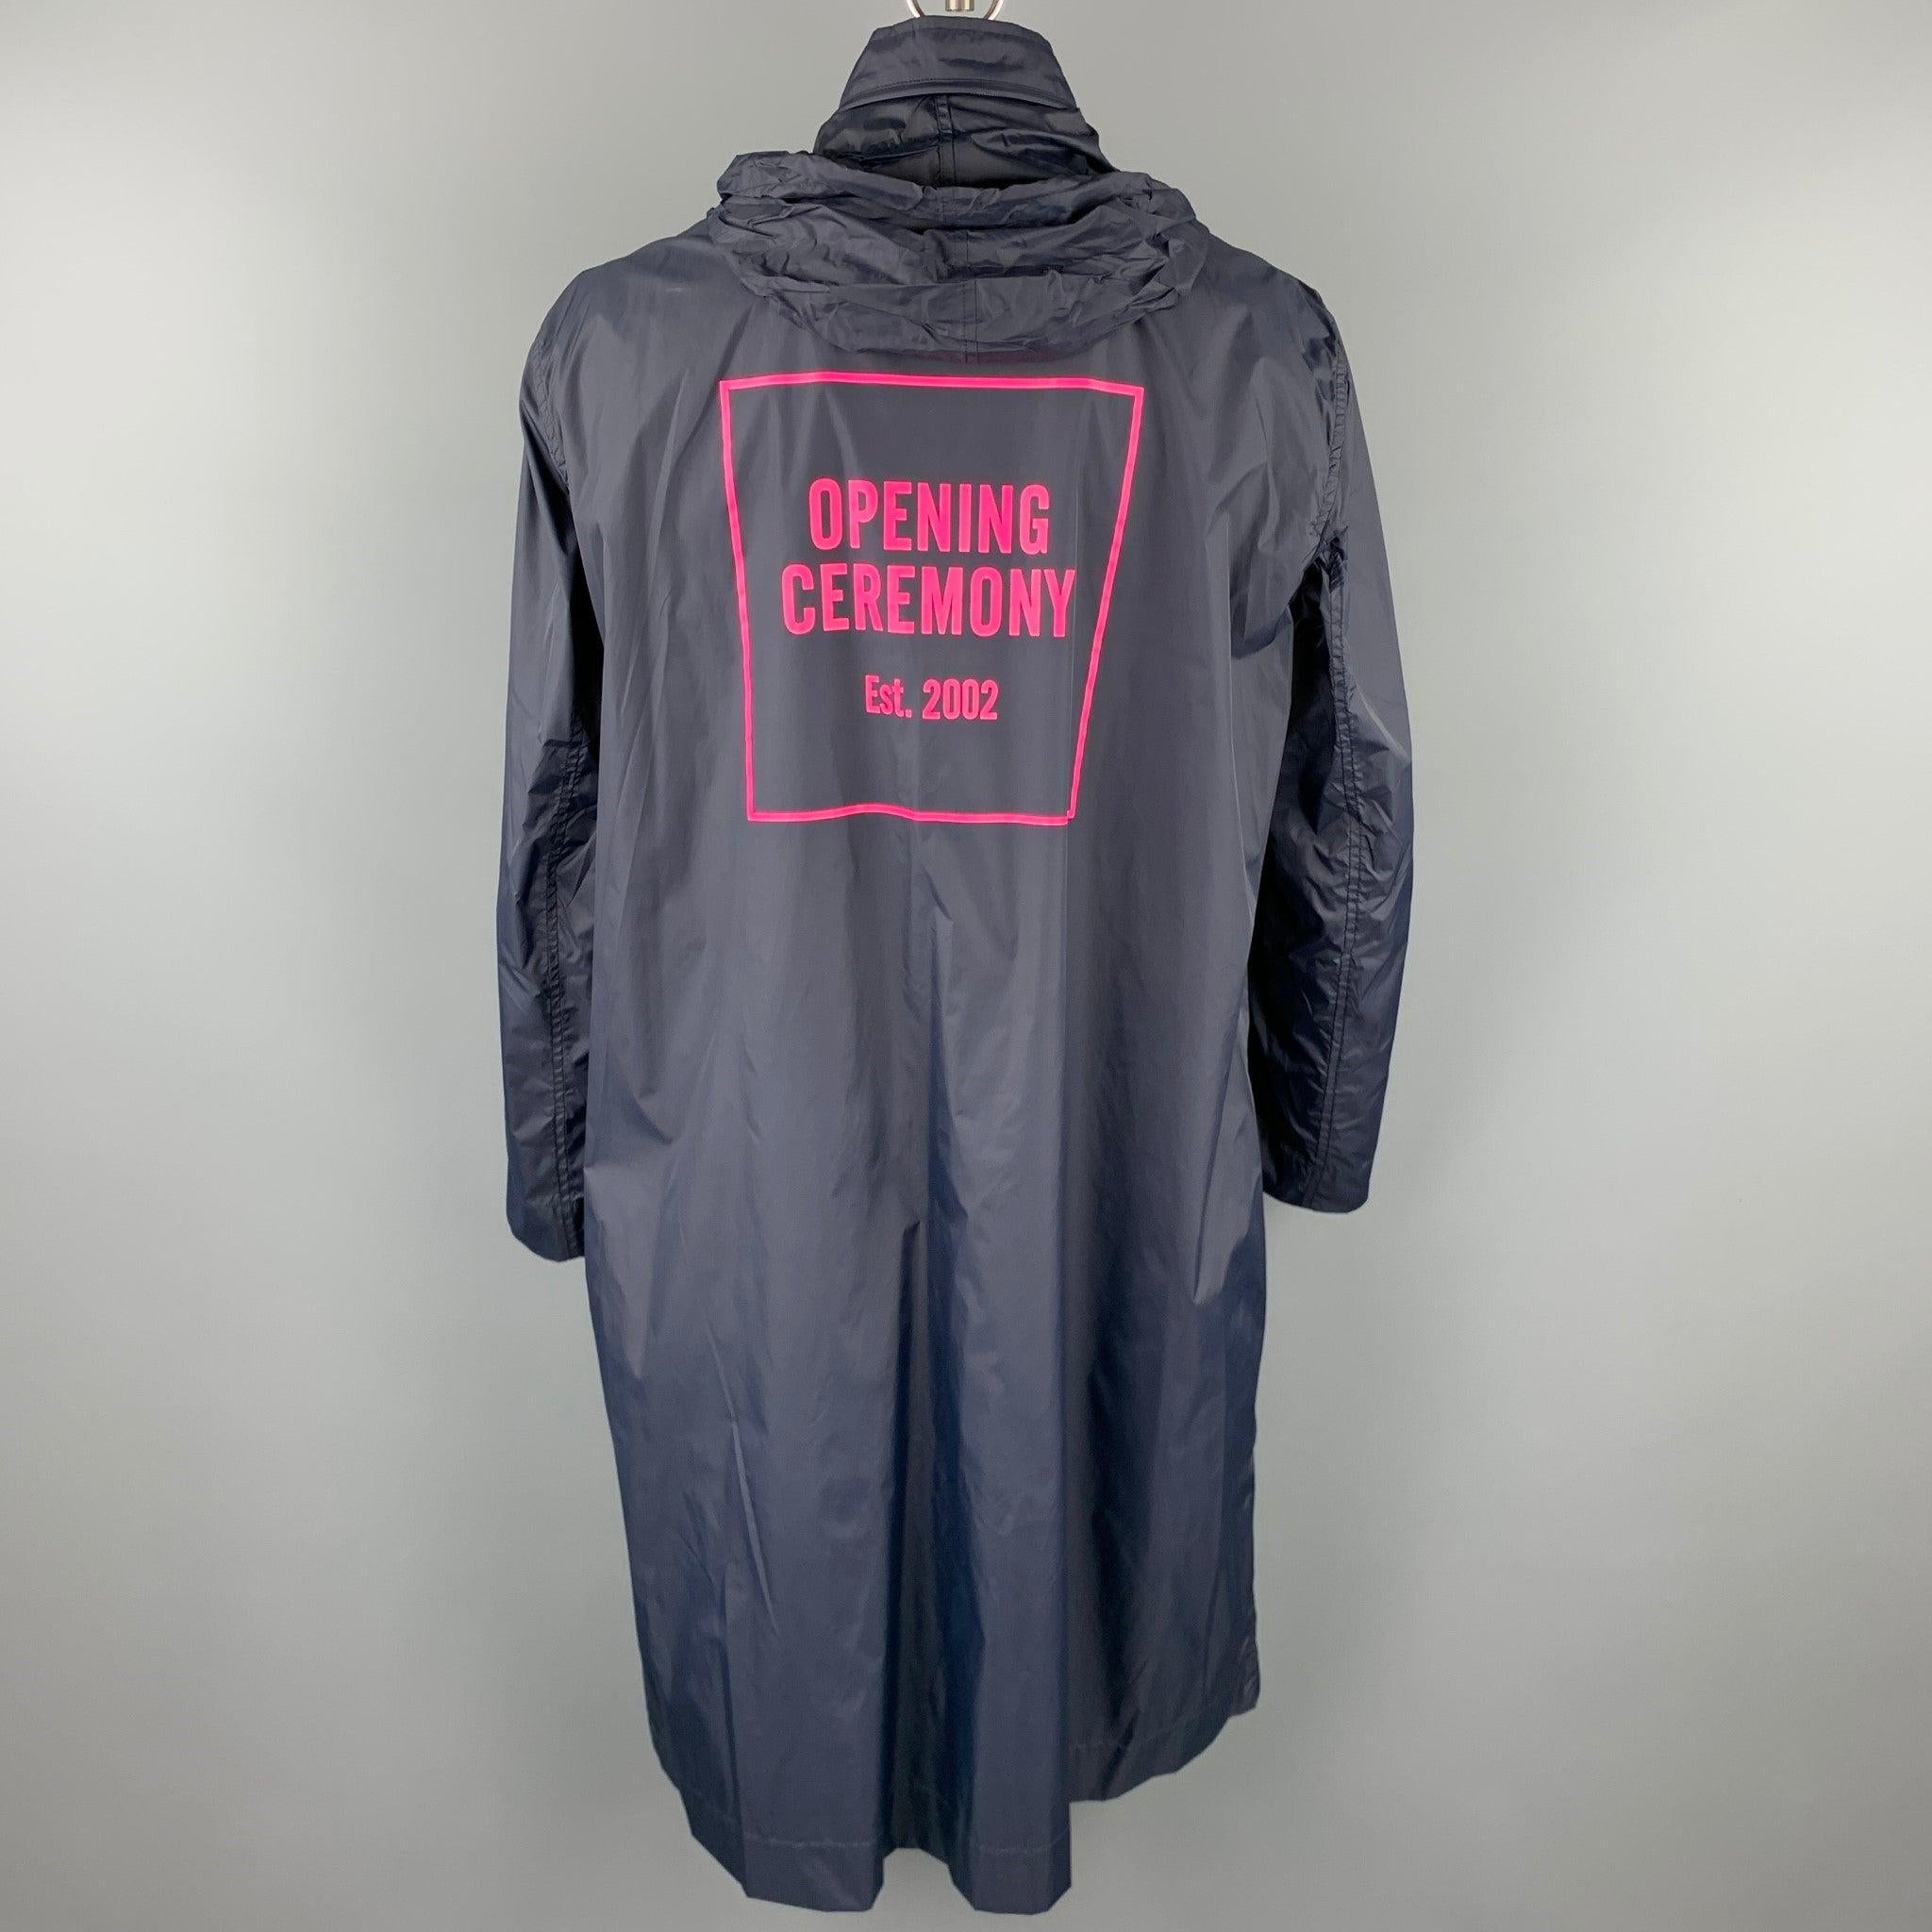 OPENING CEREMONY rain coat comes in a navy nylon featuring a hidden hood style, back logo design, front pockets, and a buttoned closure.
New With Tags. 

Marked:  L 

Measurements: 
 
Shoulder: 22 inches 
Chest: 50 inches 
Sleeve: 27 inches 
Length: